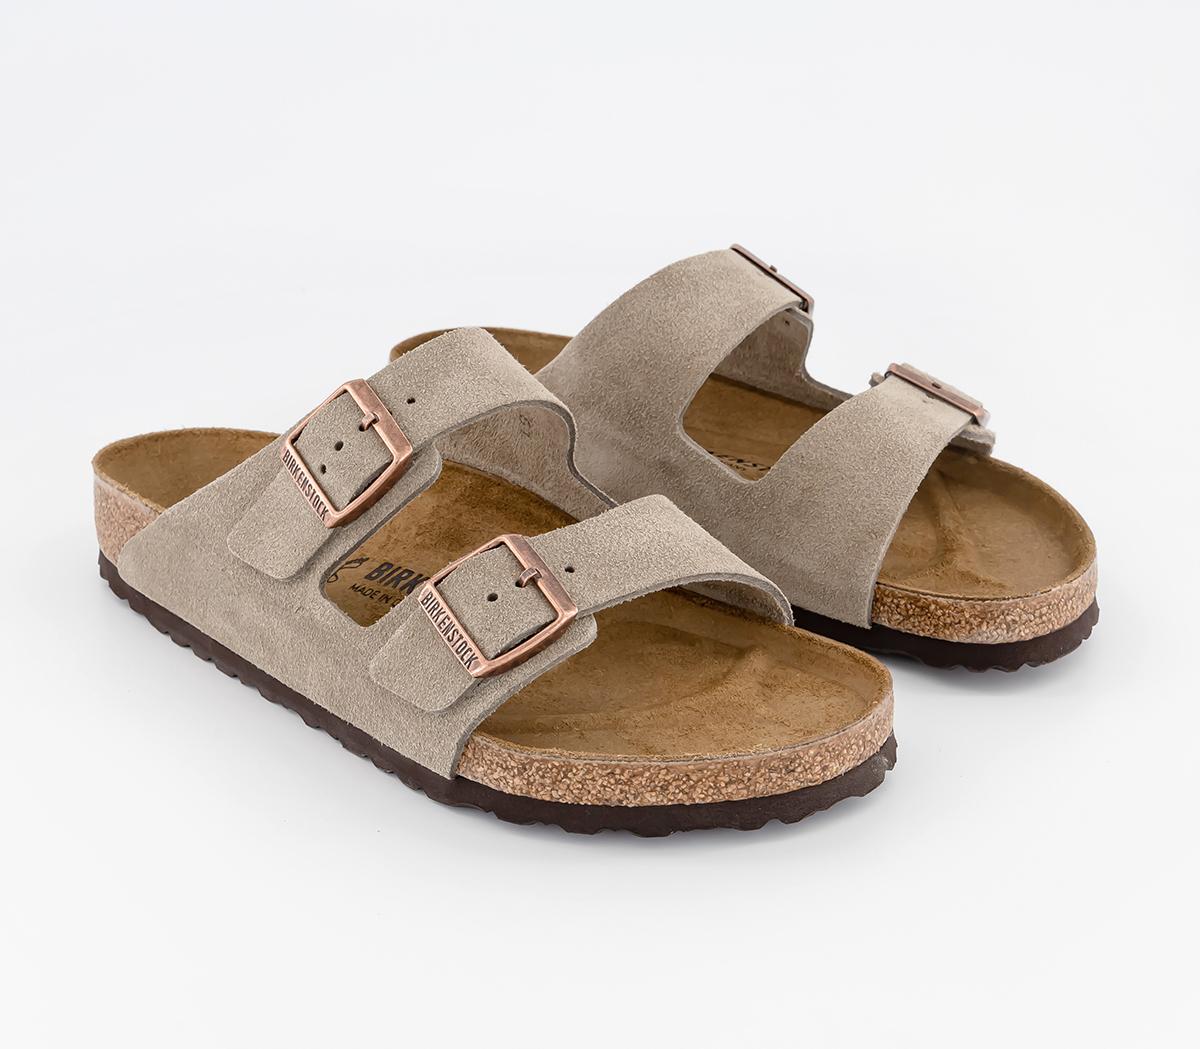 Birkenstock Mens Arizona Two Strap Sandals Taupe Suede Natural, 9.5